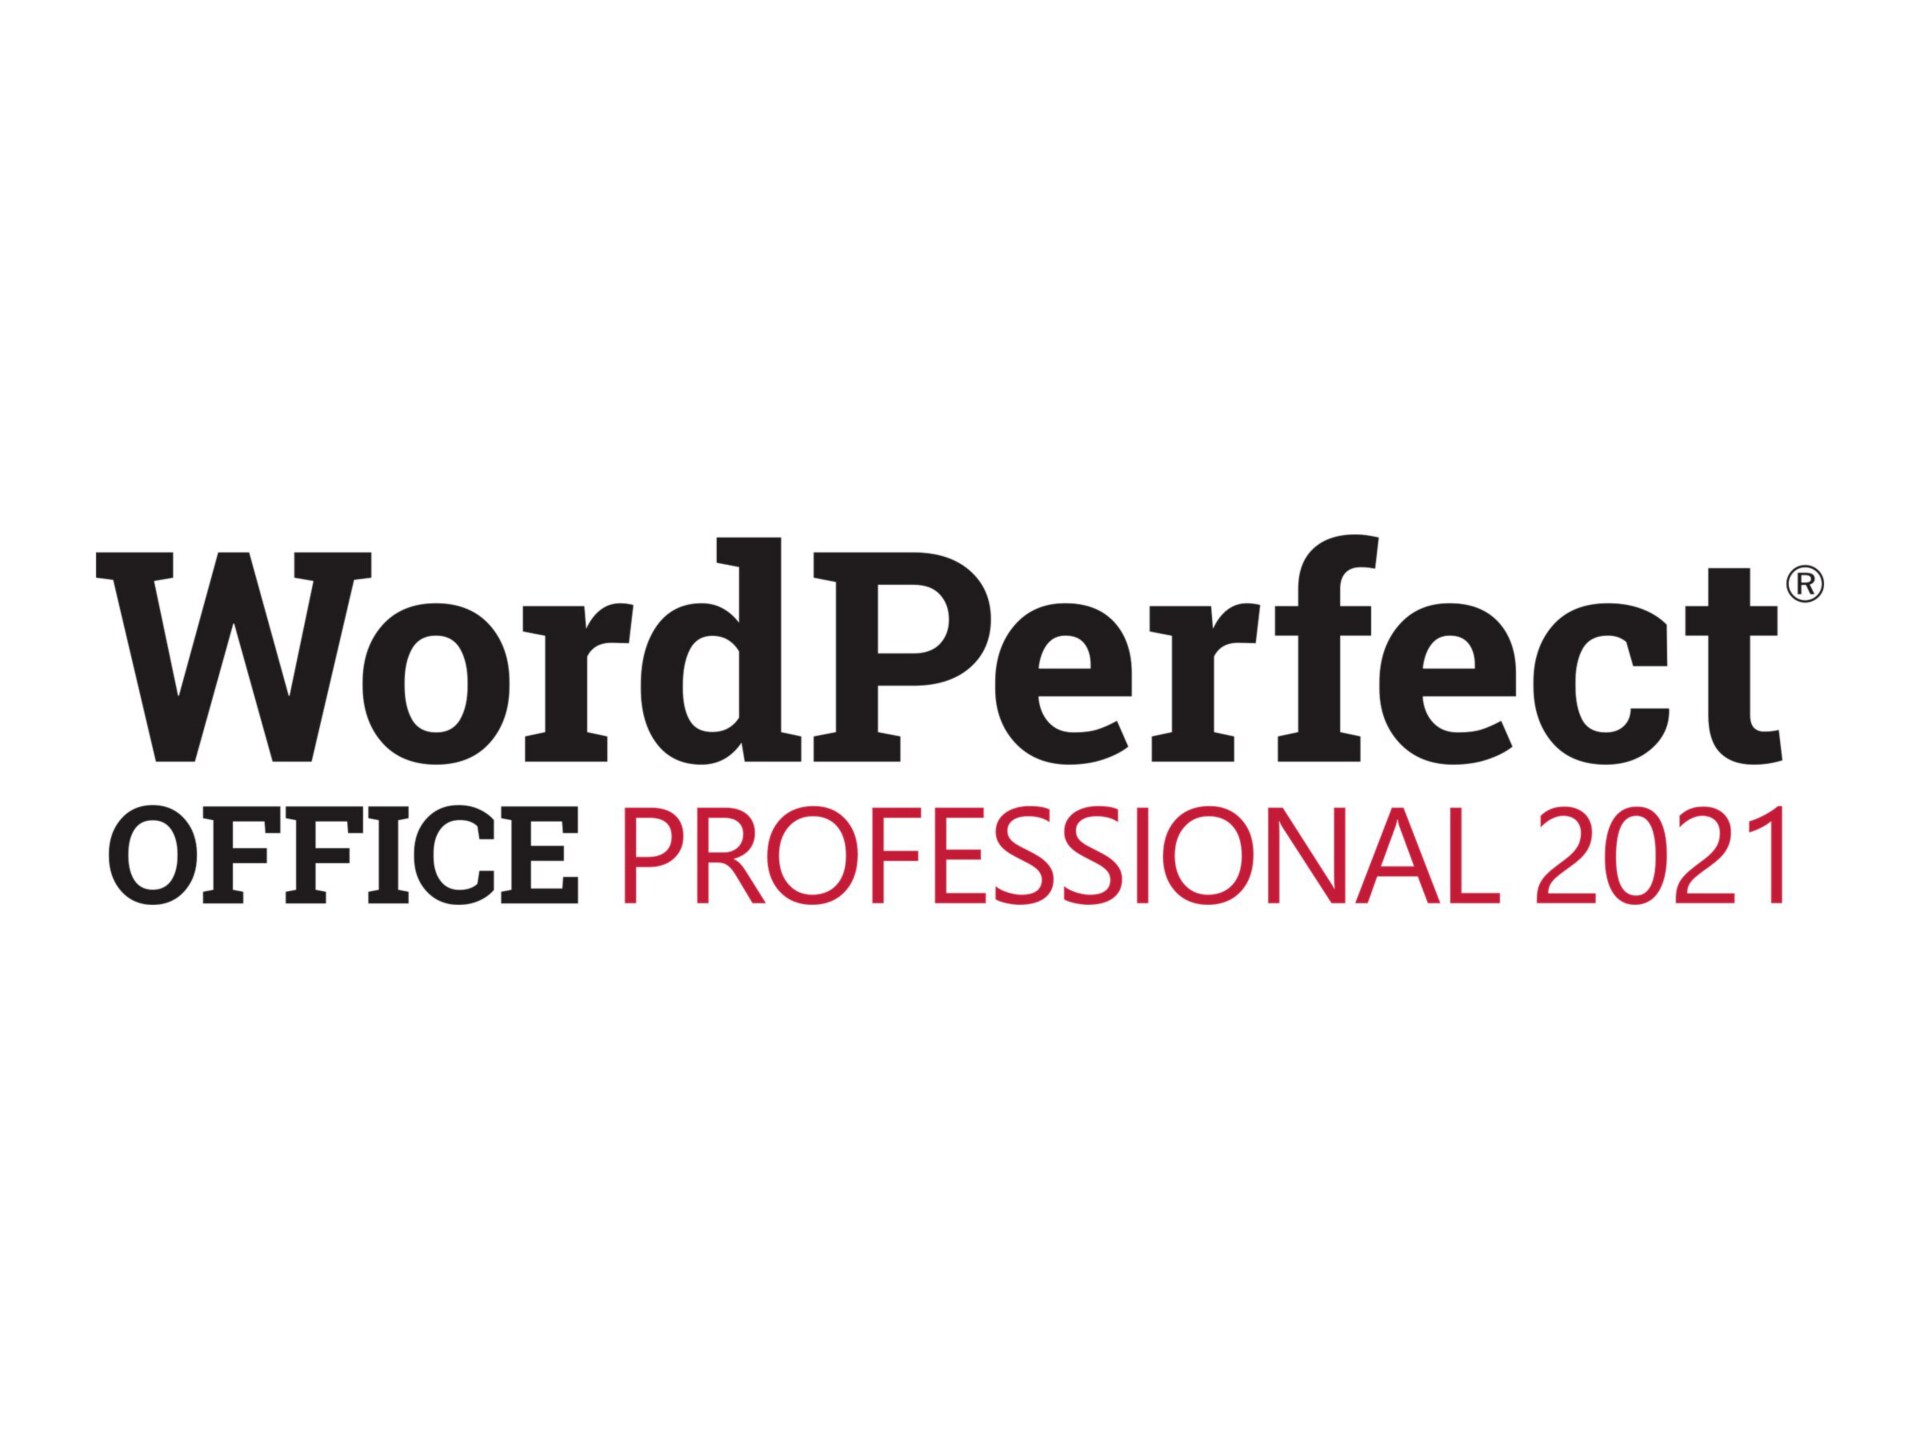 WordPerfect Office 2021 Professional - license - 1 user